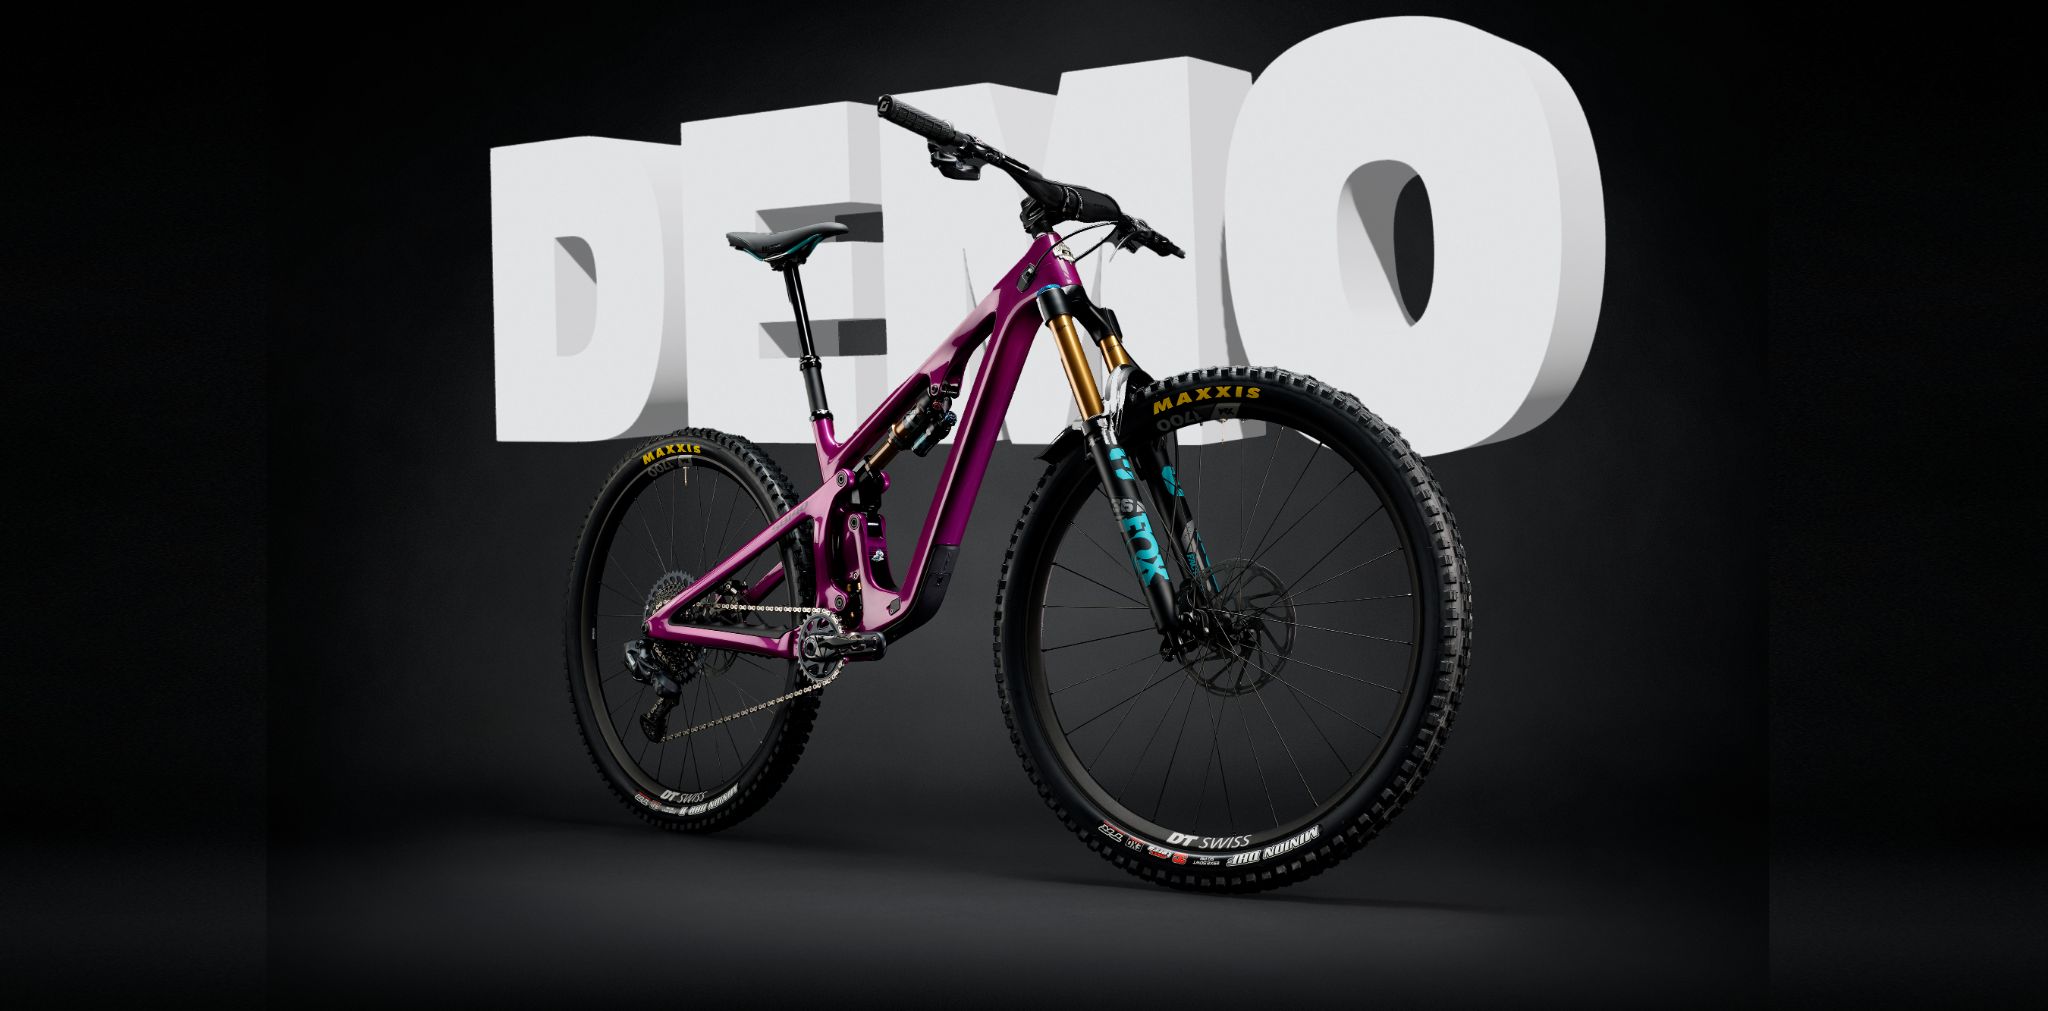 Yeti Full suspension mountain bike in front of large block text that reads "DEMO"